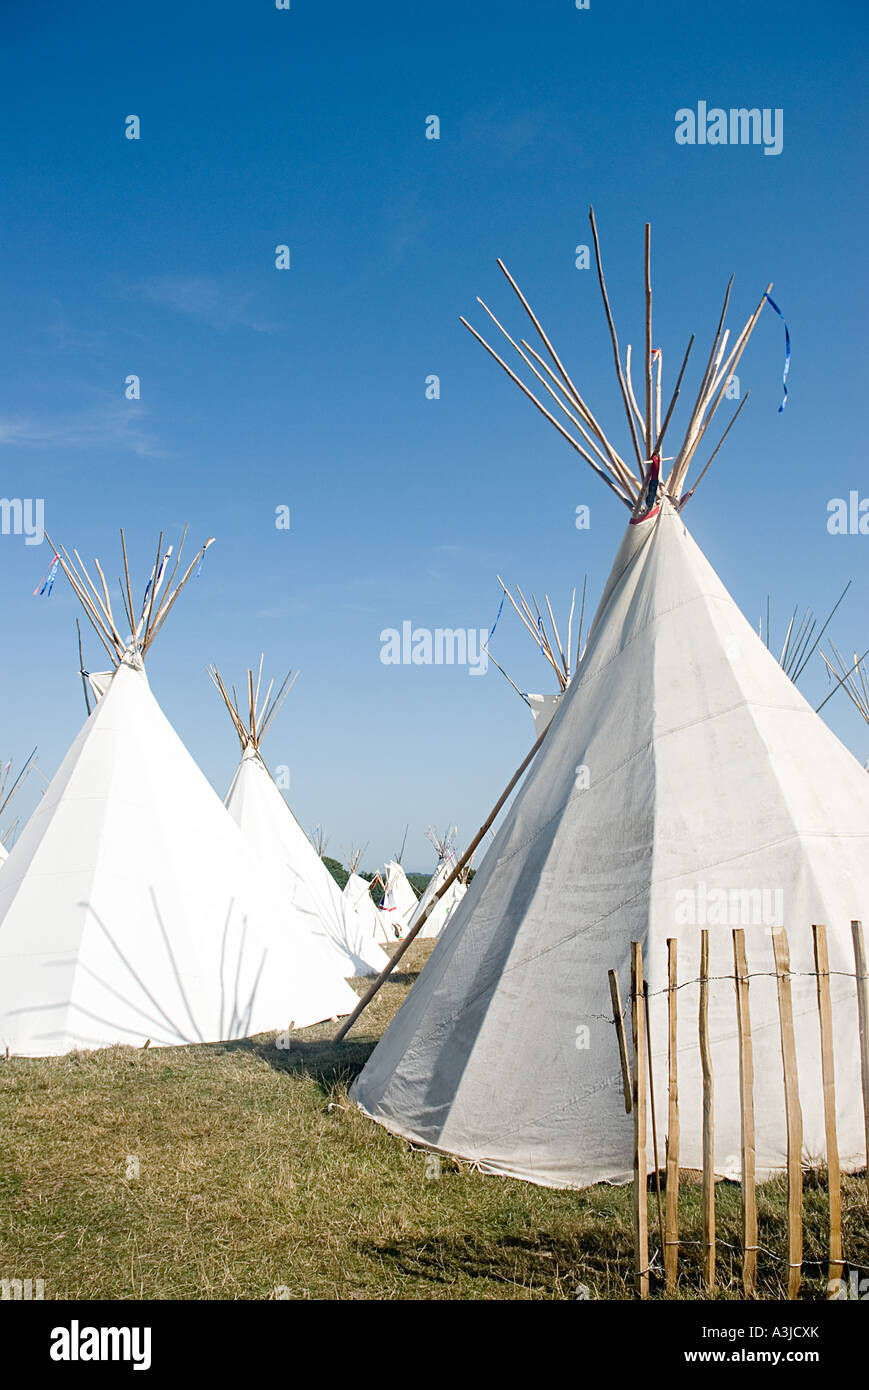 Teepees in un campo Foto Stock